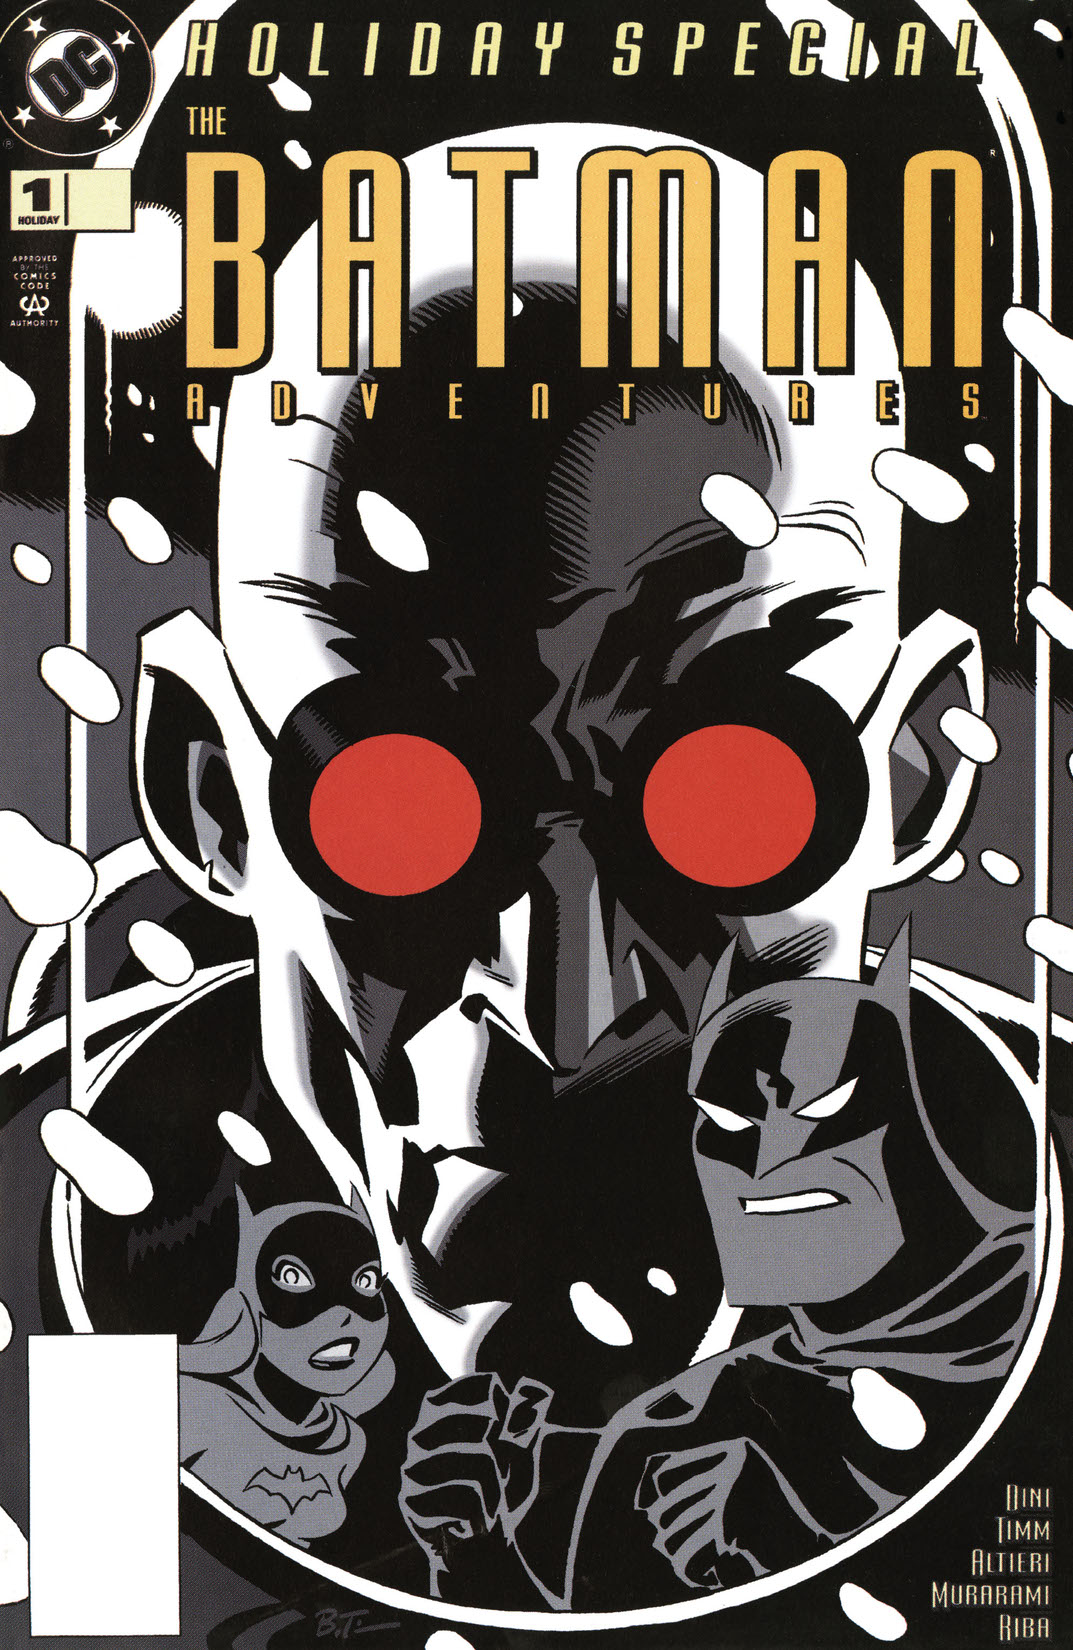 The Batman Adventures Holiday Special #1 preview images